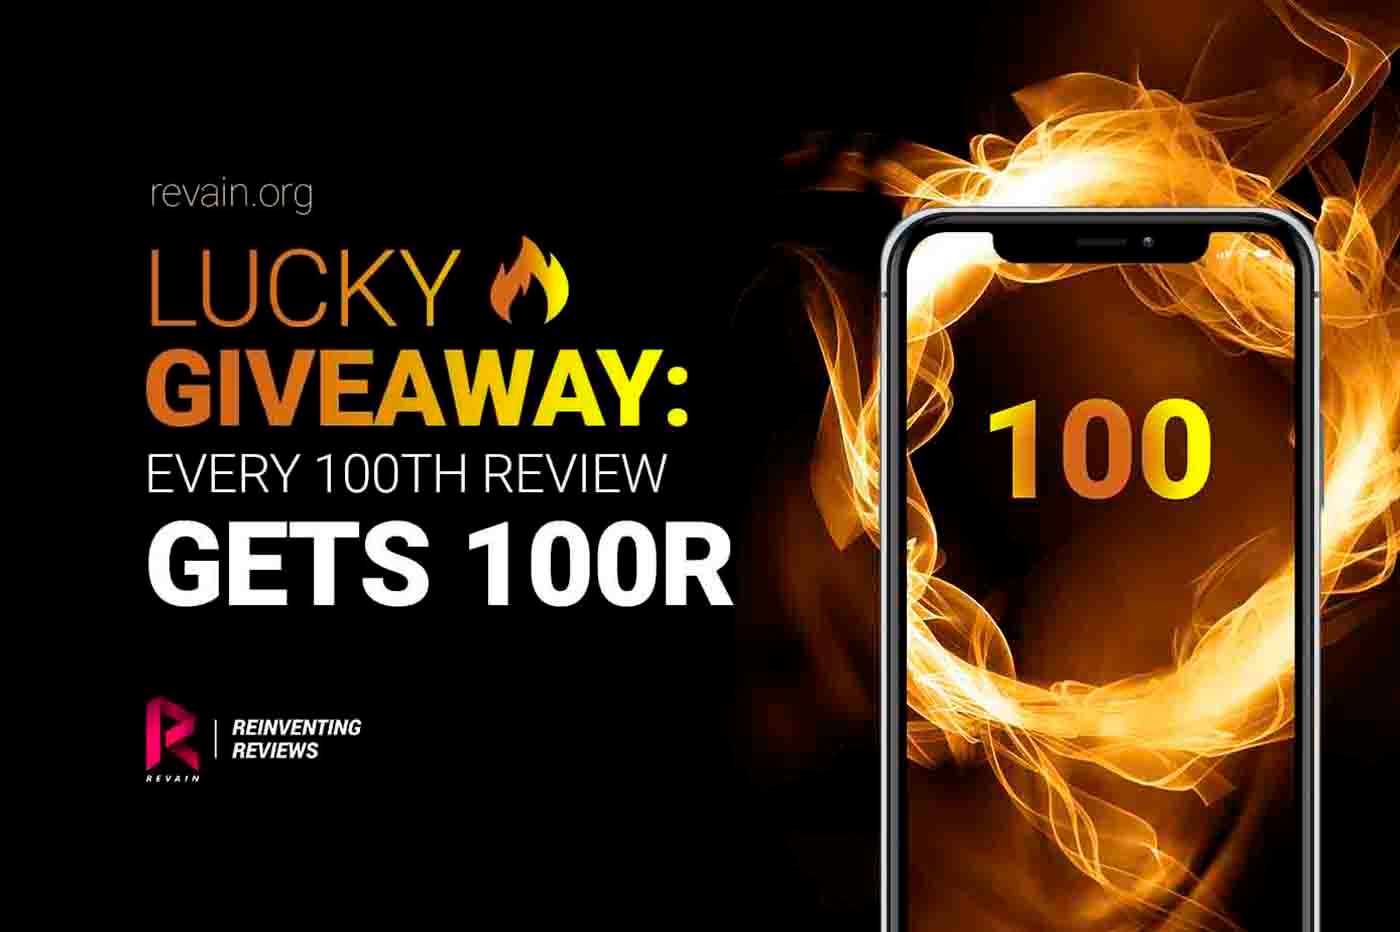 Article Revain launches new giveaway. 100 R reward for every 100th review